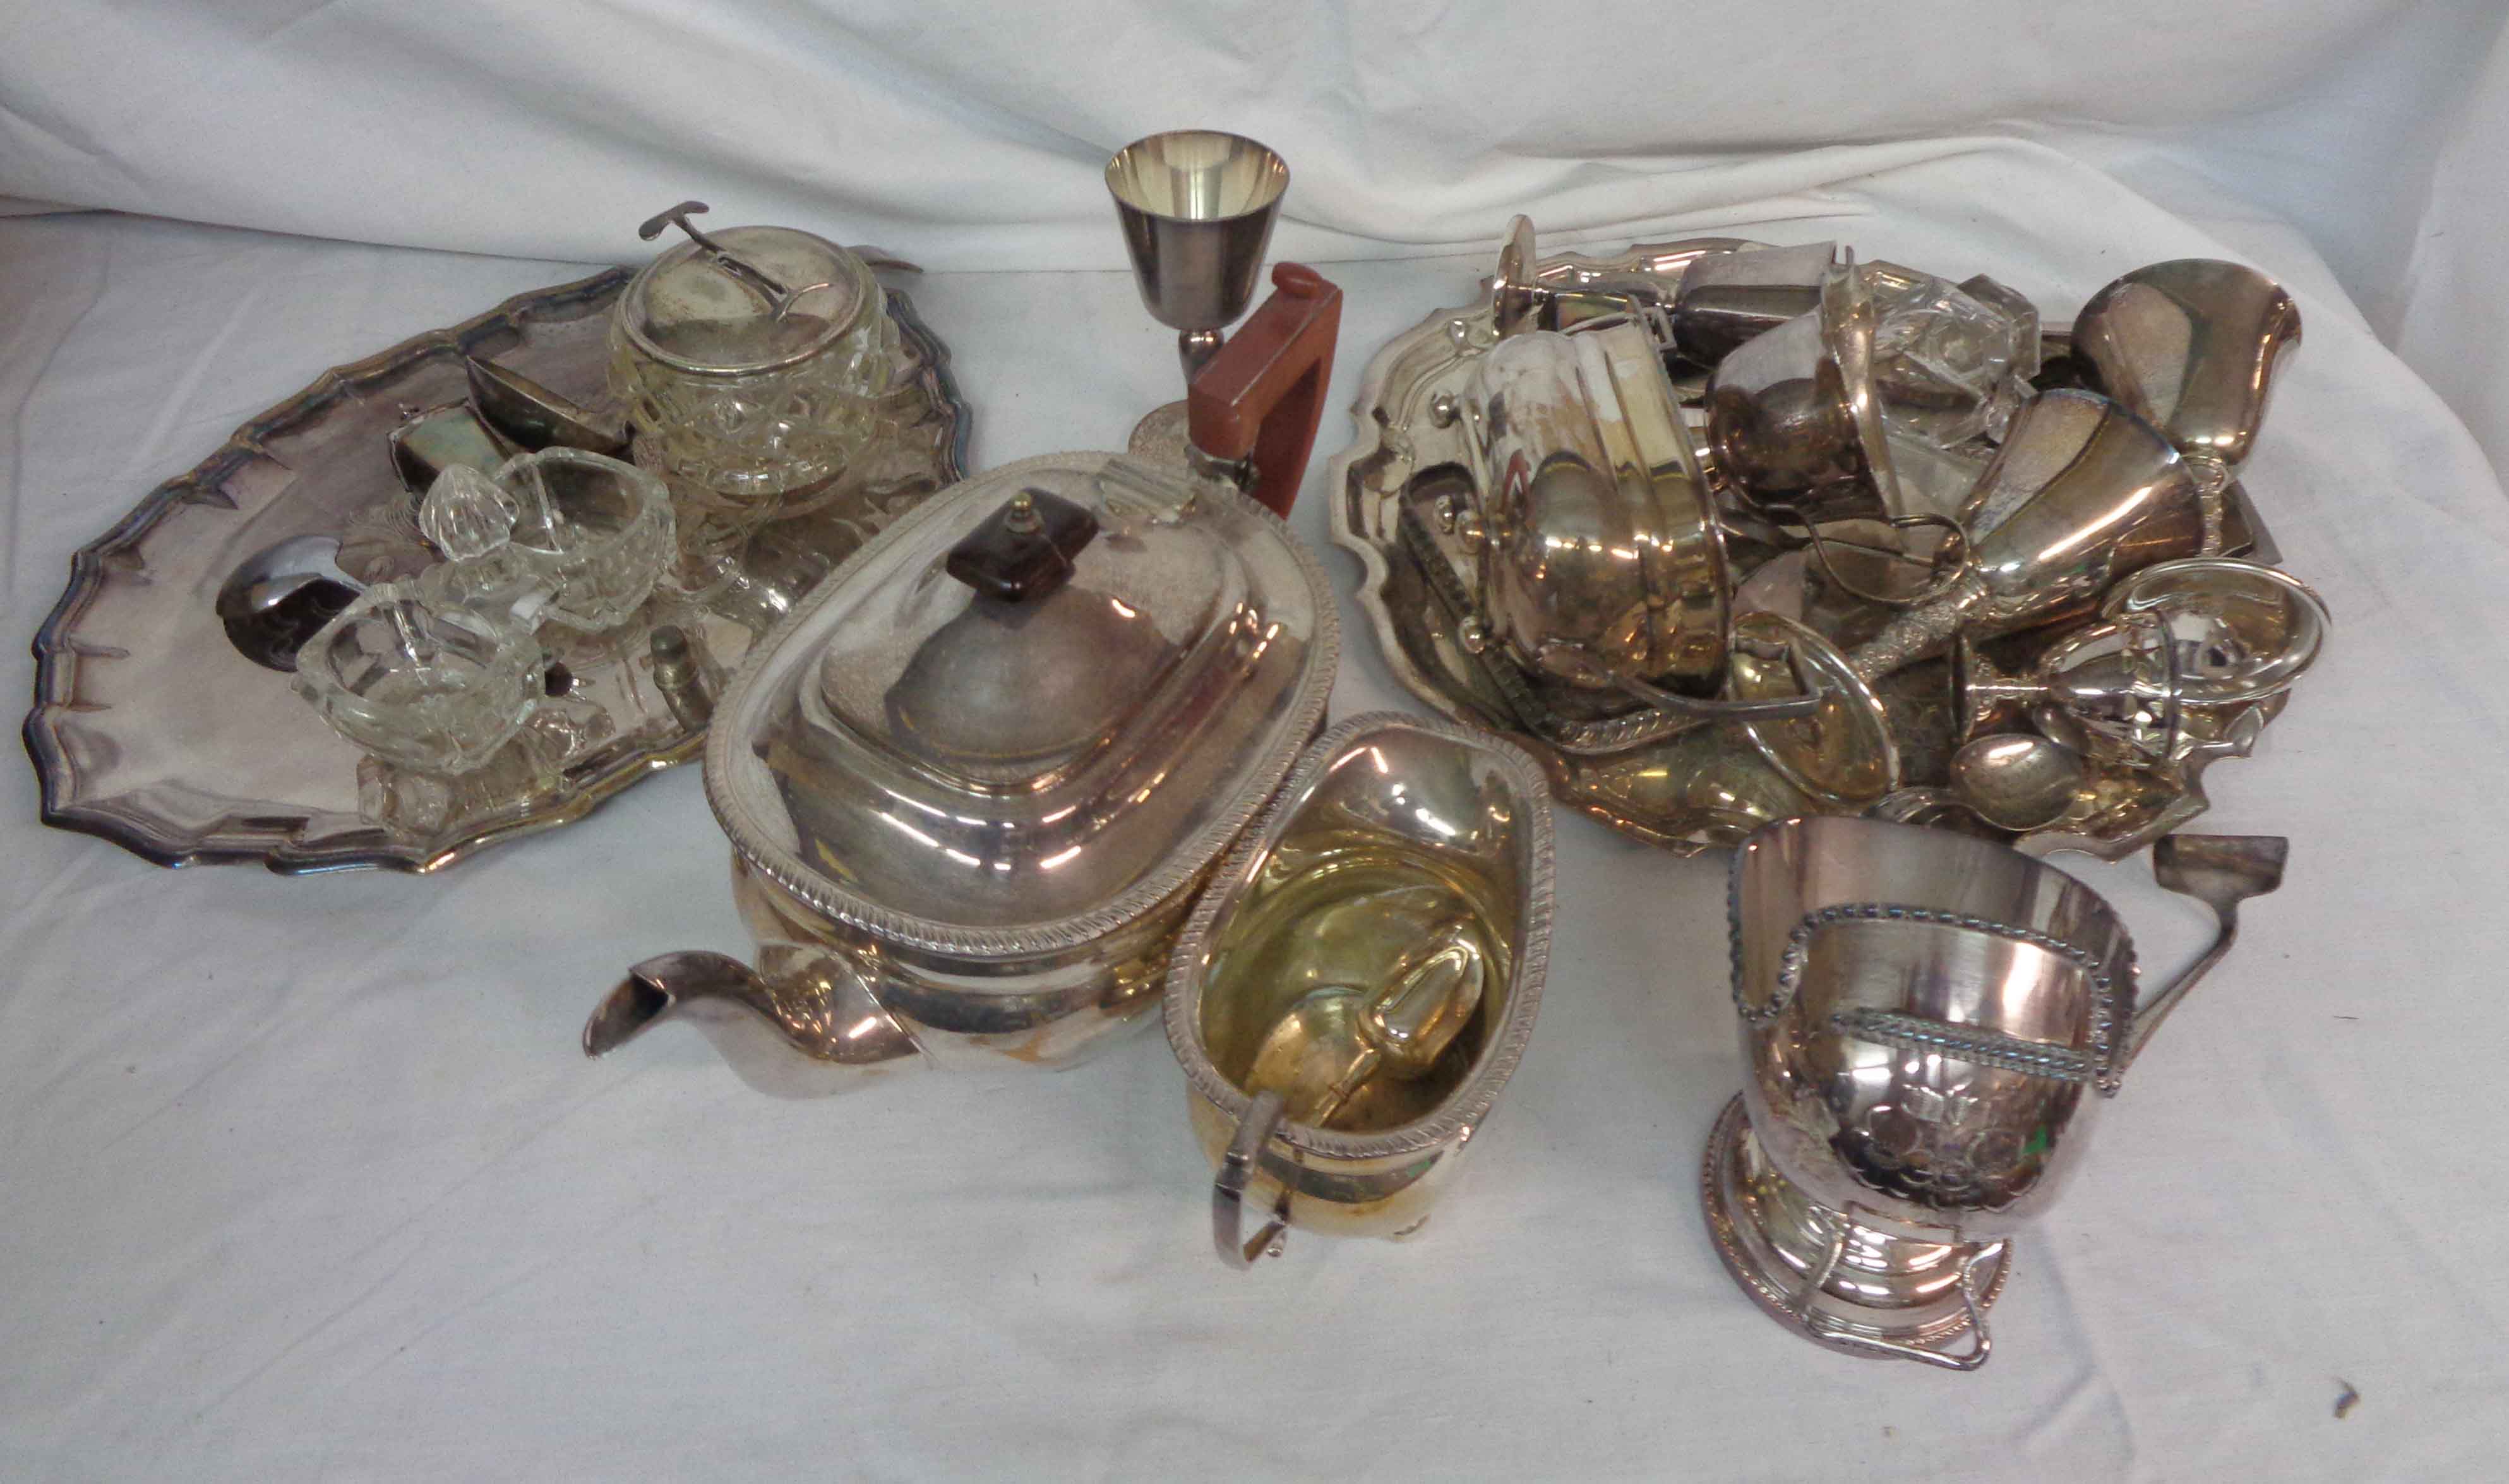 A box containing a quantity of assorted silver plated items including teapot, trays, etc.